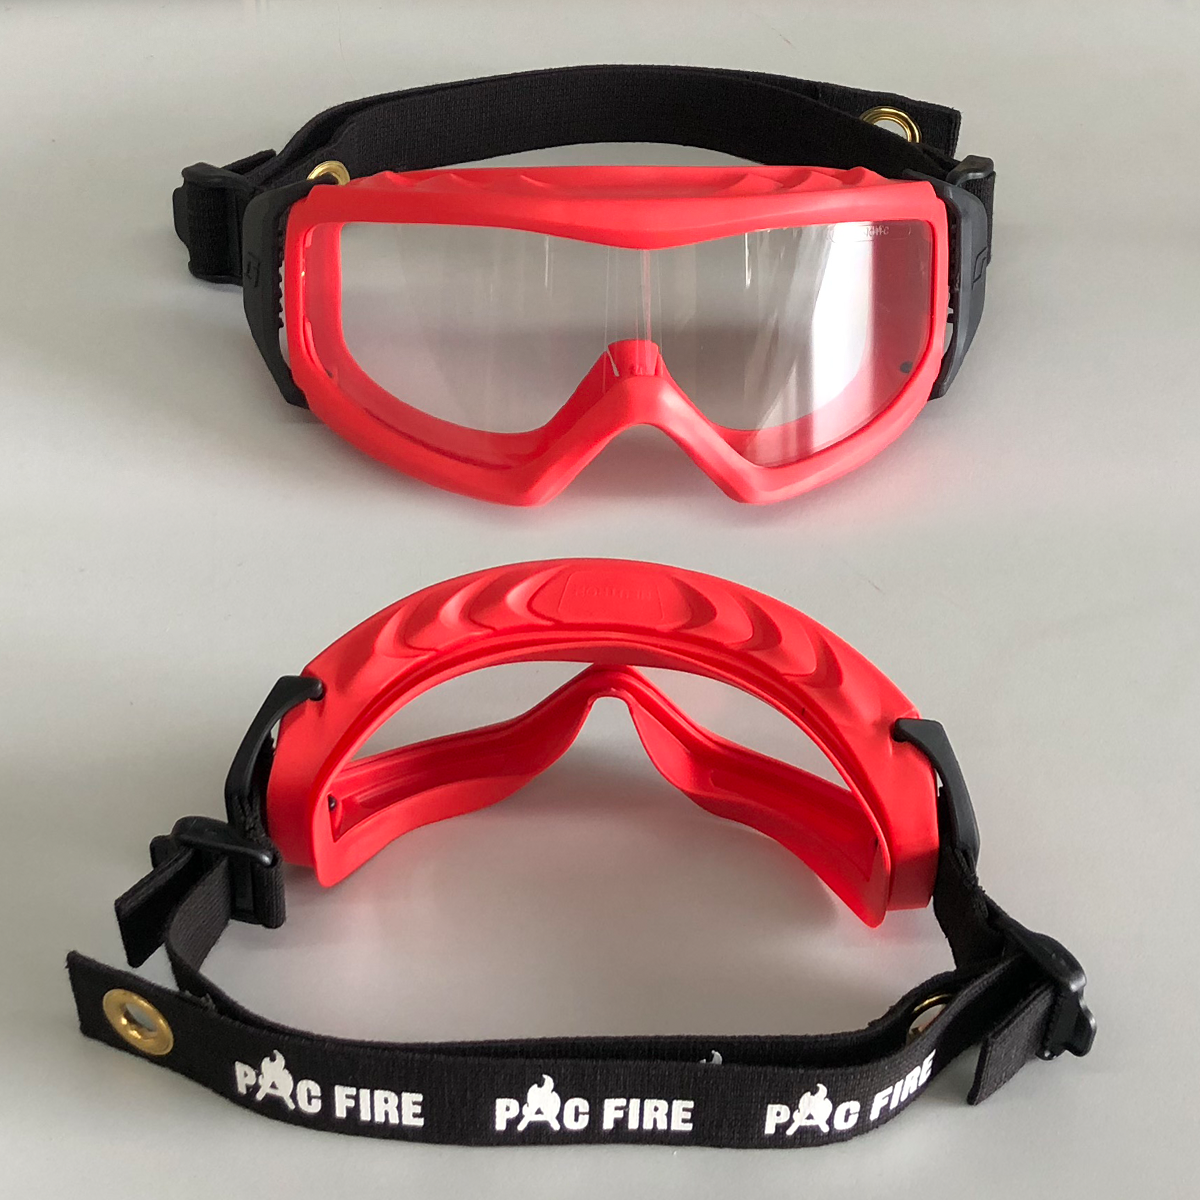 Pac Fire's new firefighting goggles have arrived